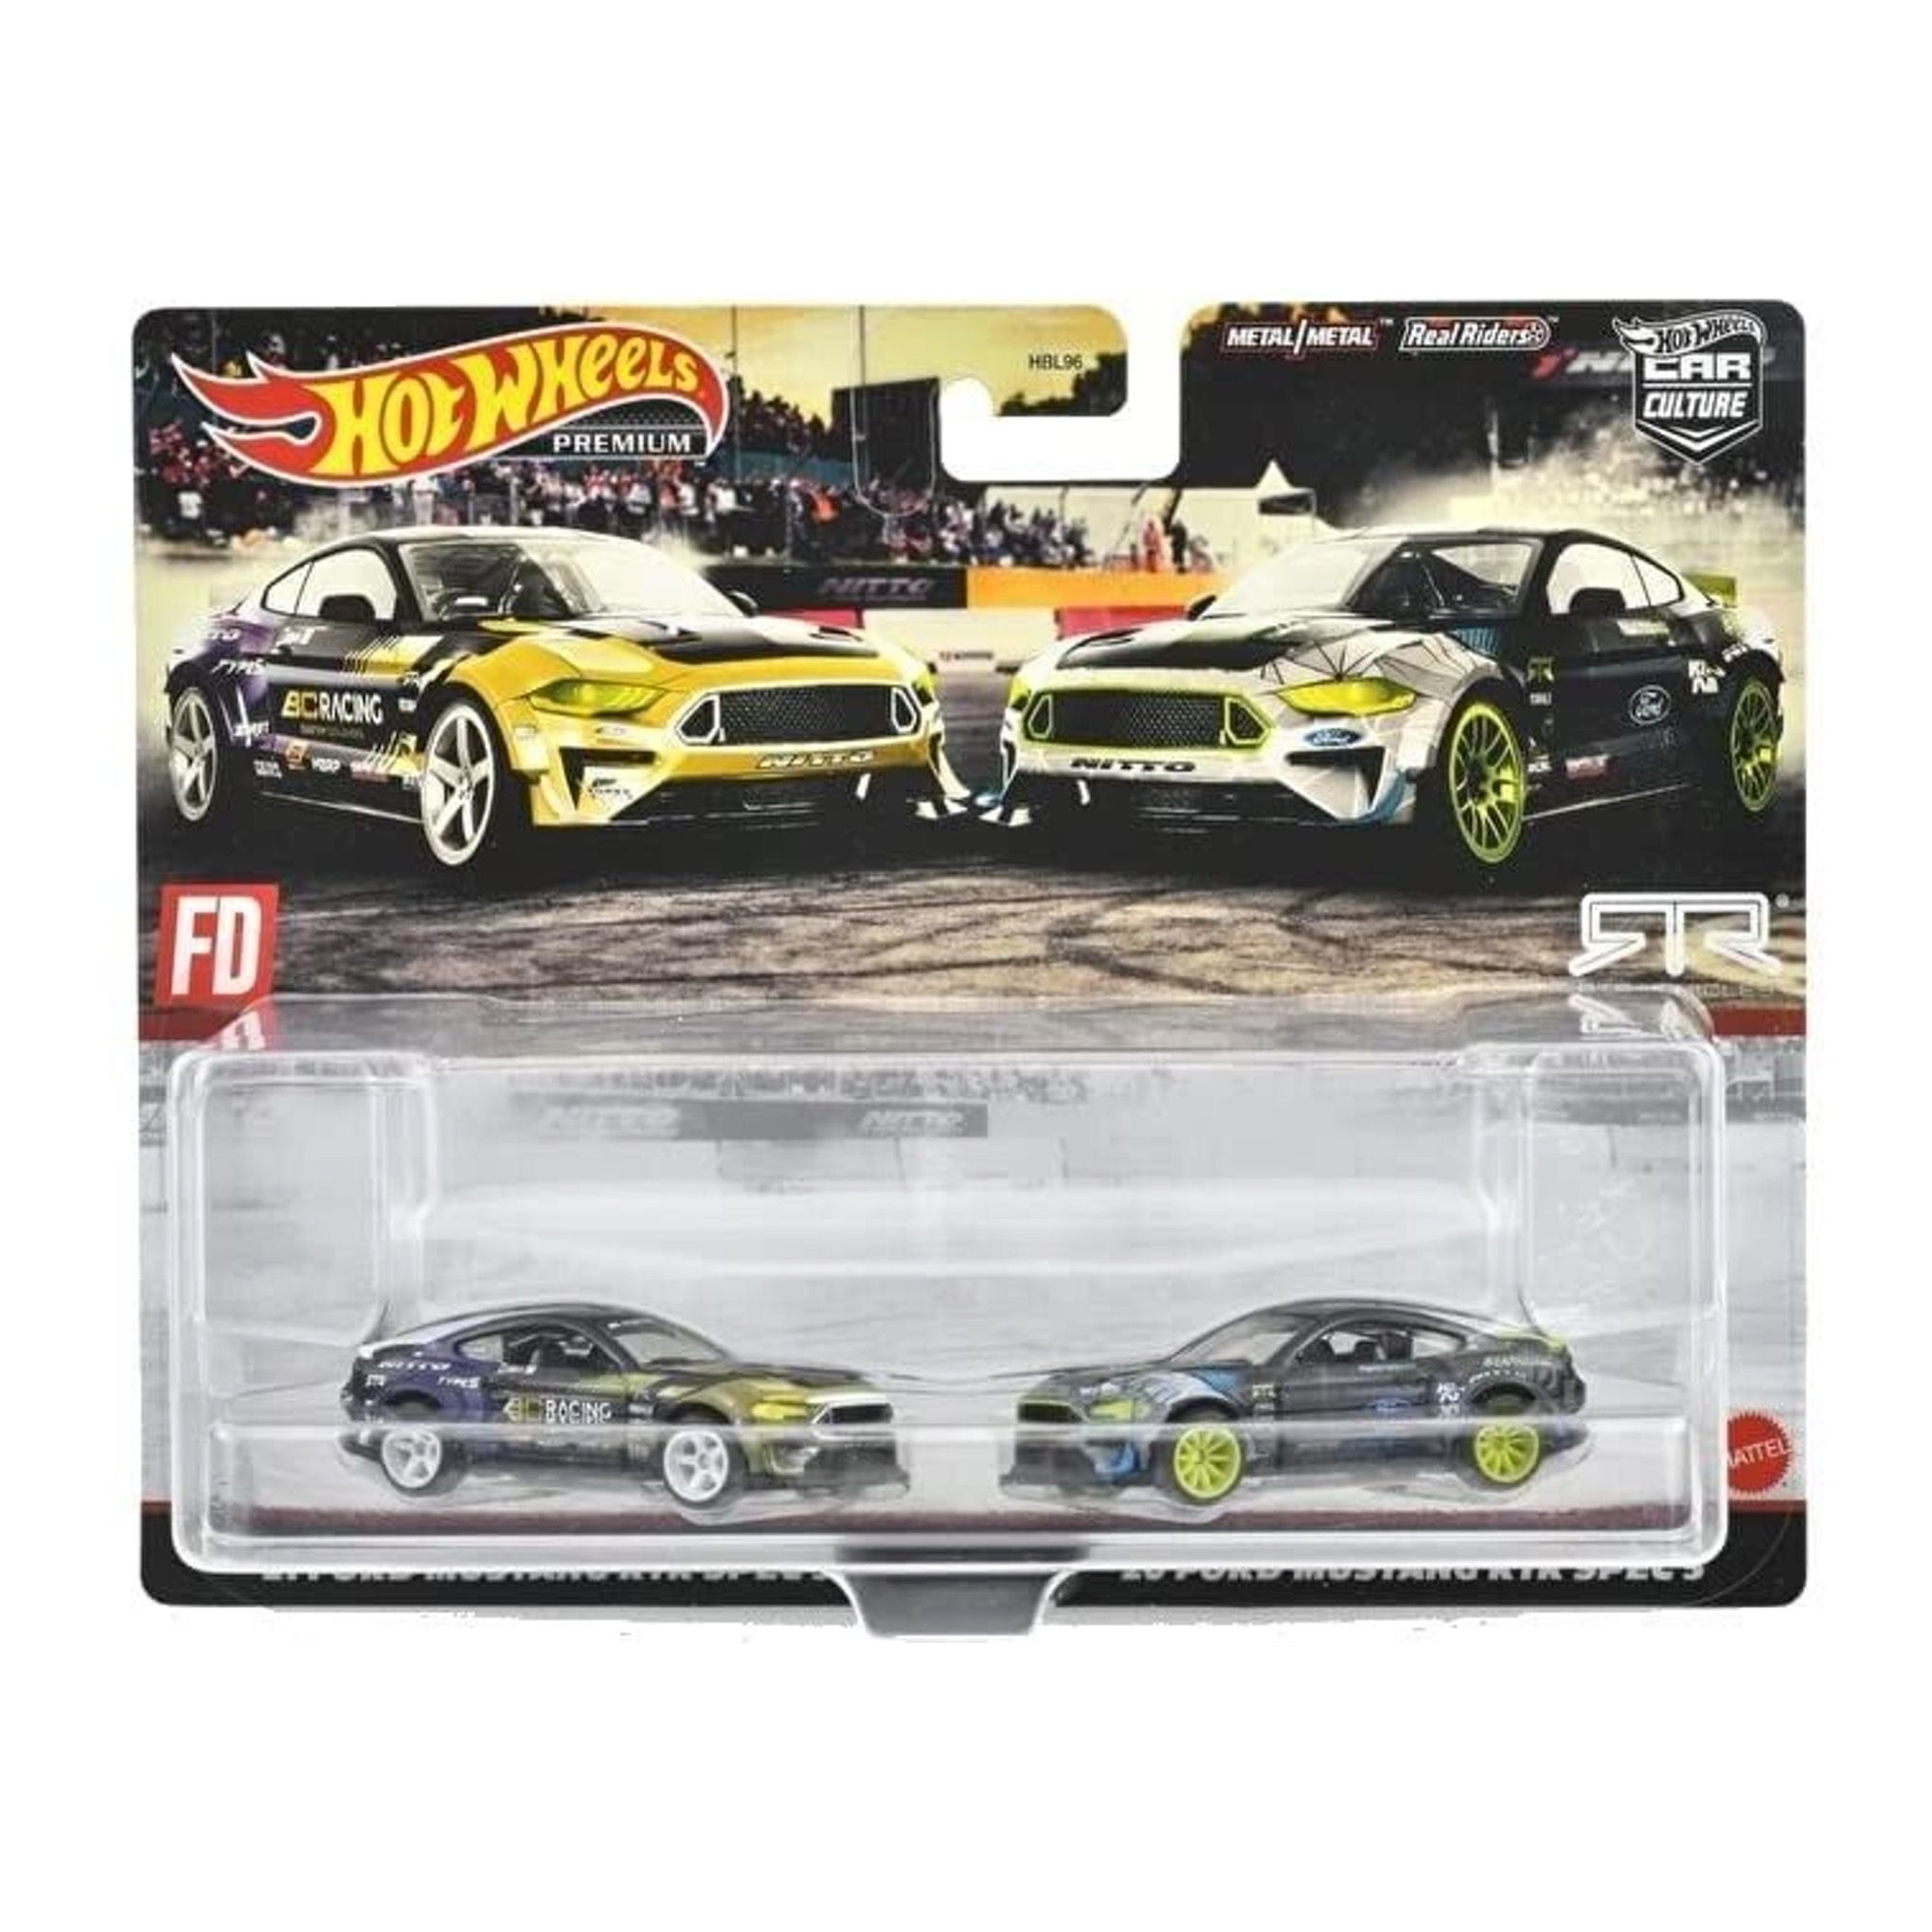 Машинка Hot Wheels HBL96-HCY71 металлическая 21 Ford Mustang & 20 Ford Mustang машинка металлическая элемент ford mustang shelby 1 24